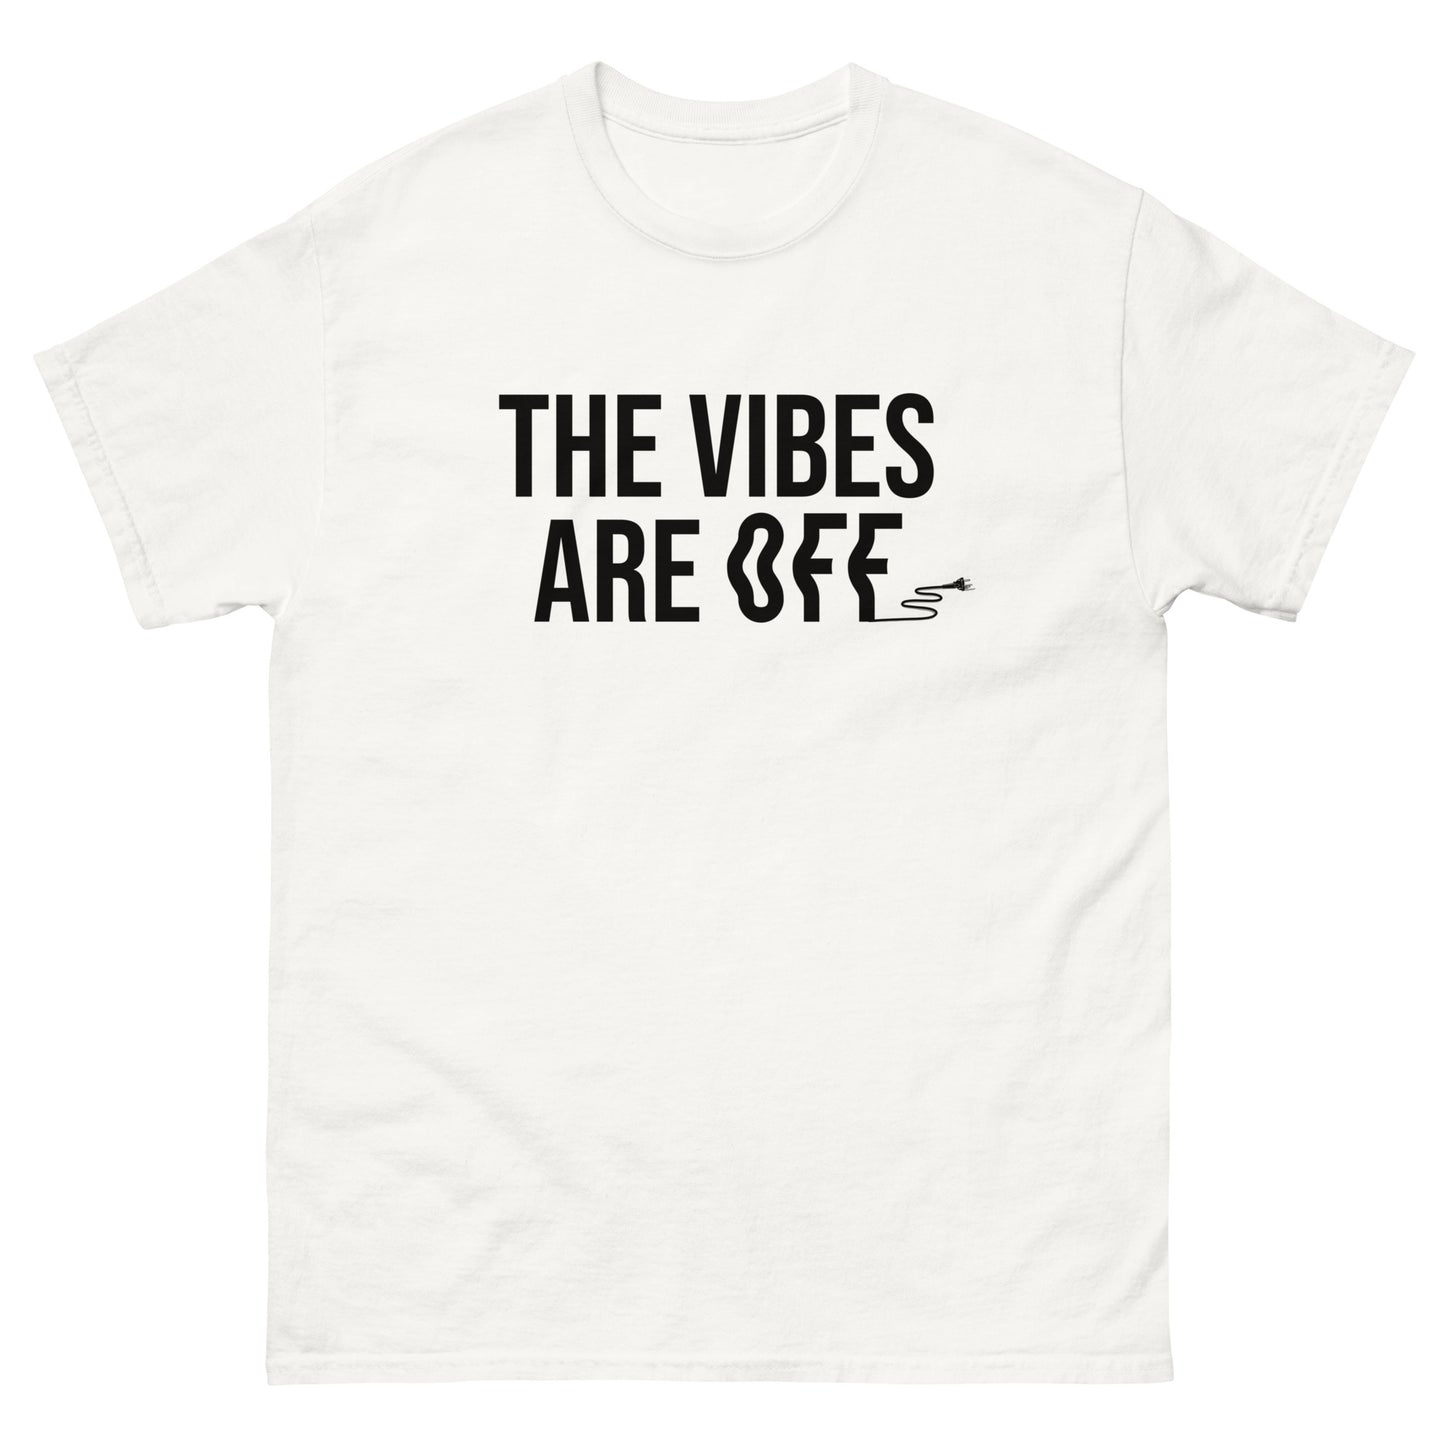 The vibes are off (plug)- Men’s Tee